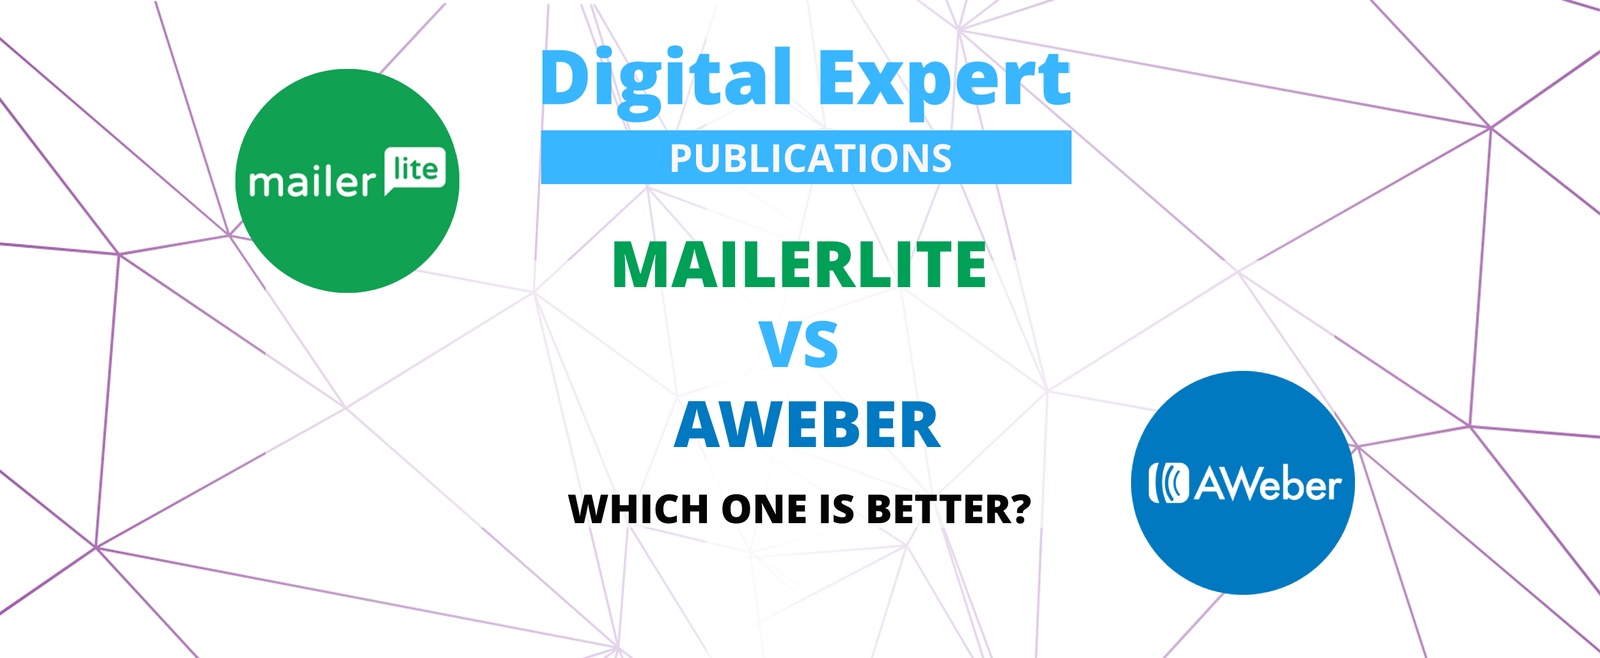 Mailerlite vs Aweber. Which One is Better? Service comparison - Digital Expert